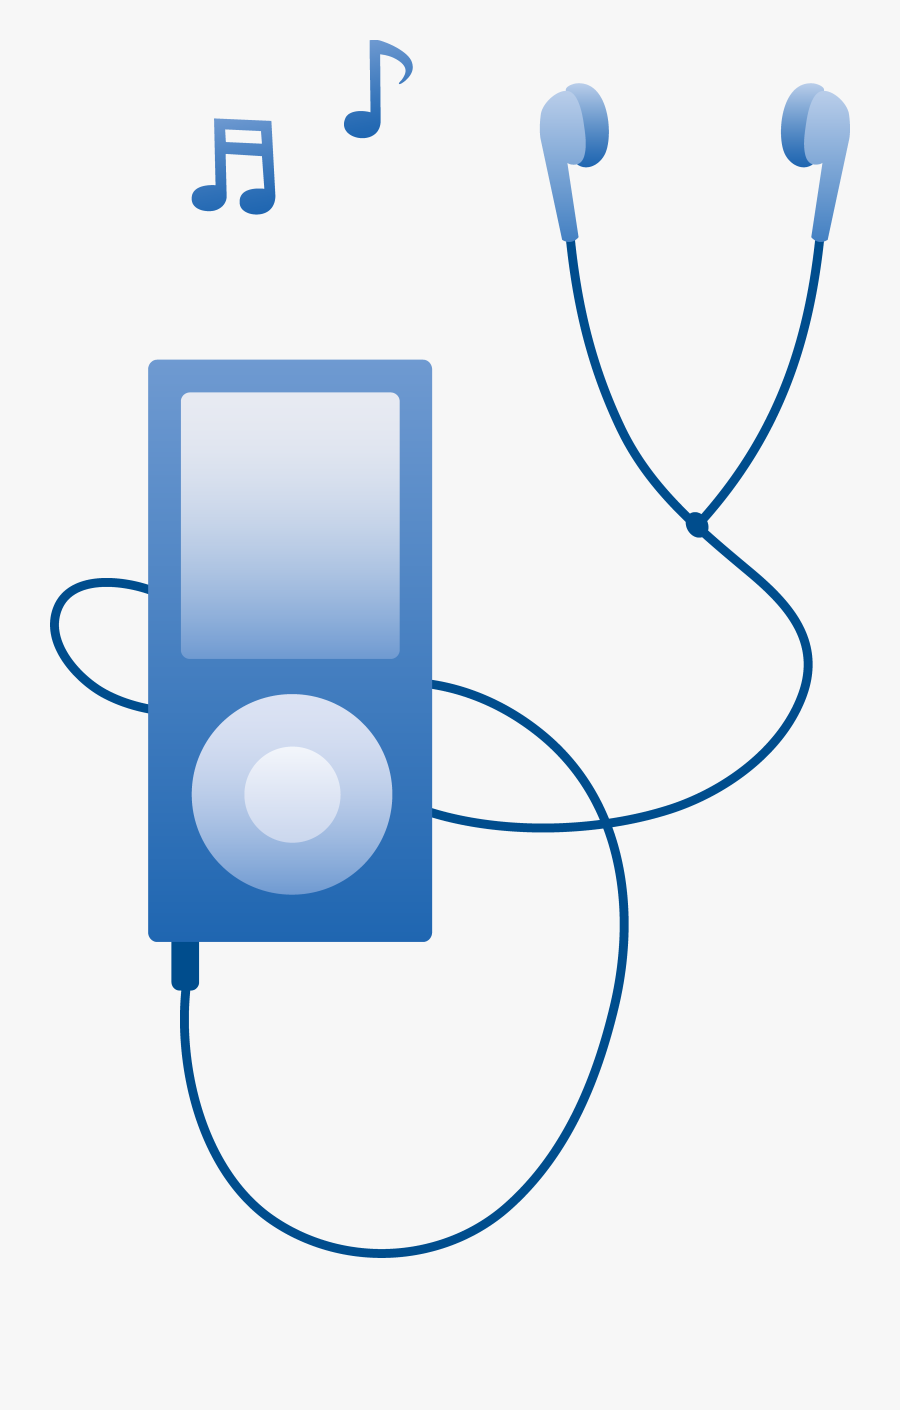 Blue Mp3 Player Playing Music Free - Music Player Clip Art, Transparent Clipart